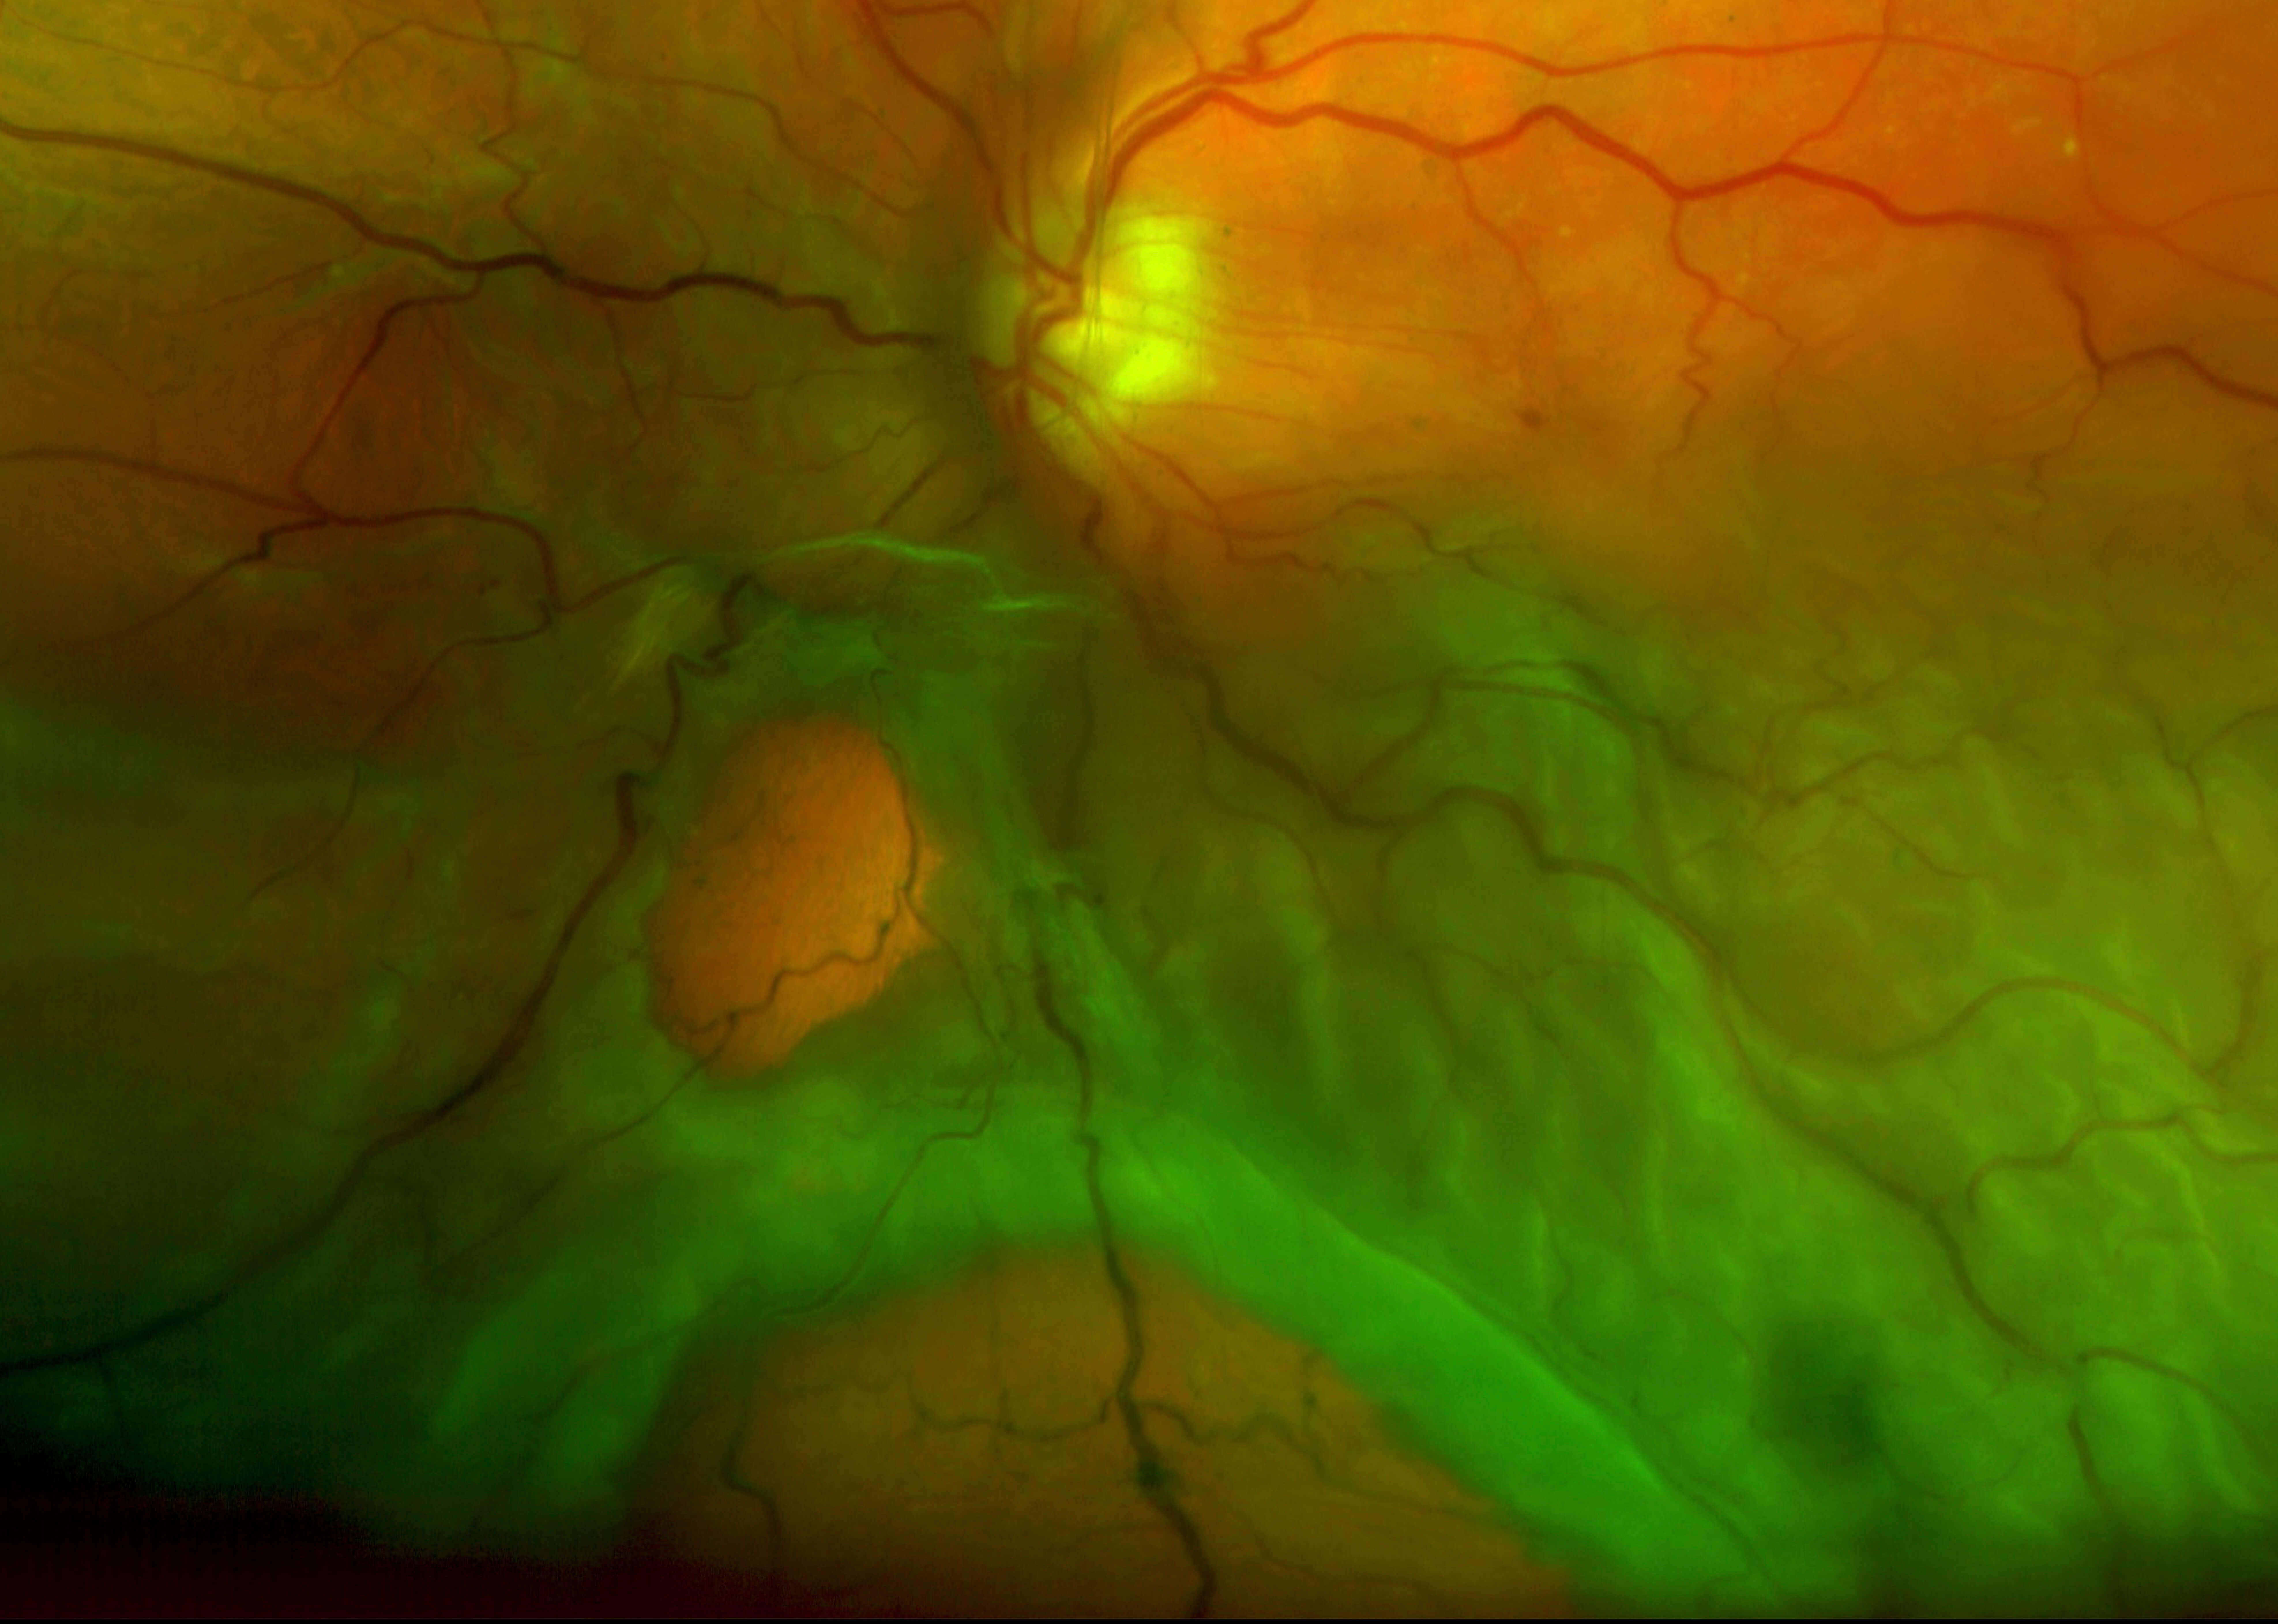 Figure 13.3.1 Degenerative Retinoschisis with a Large Outer Hole Break Leading to a Concurrent Rhegmatogenous Retinal Detachment